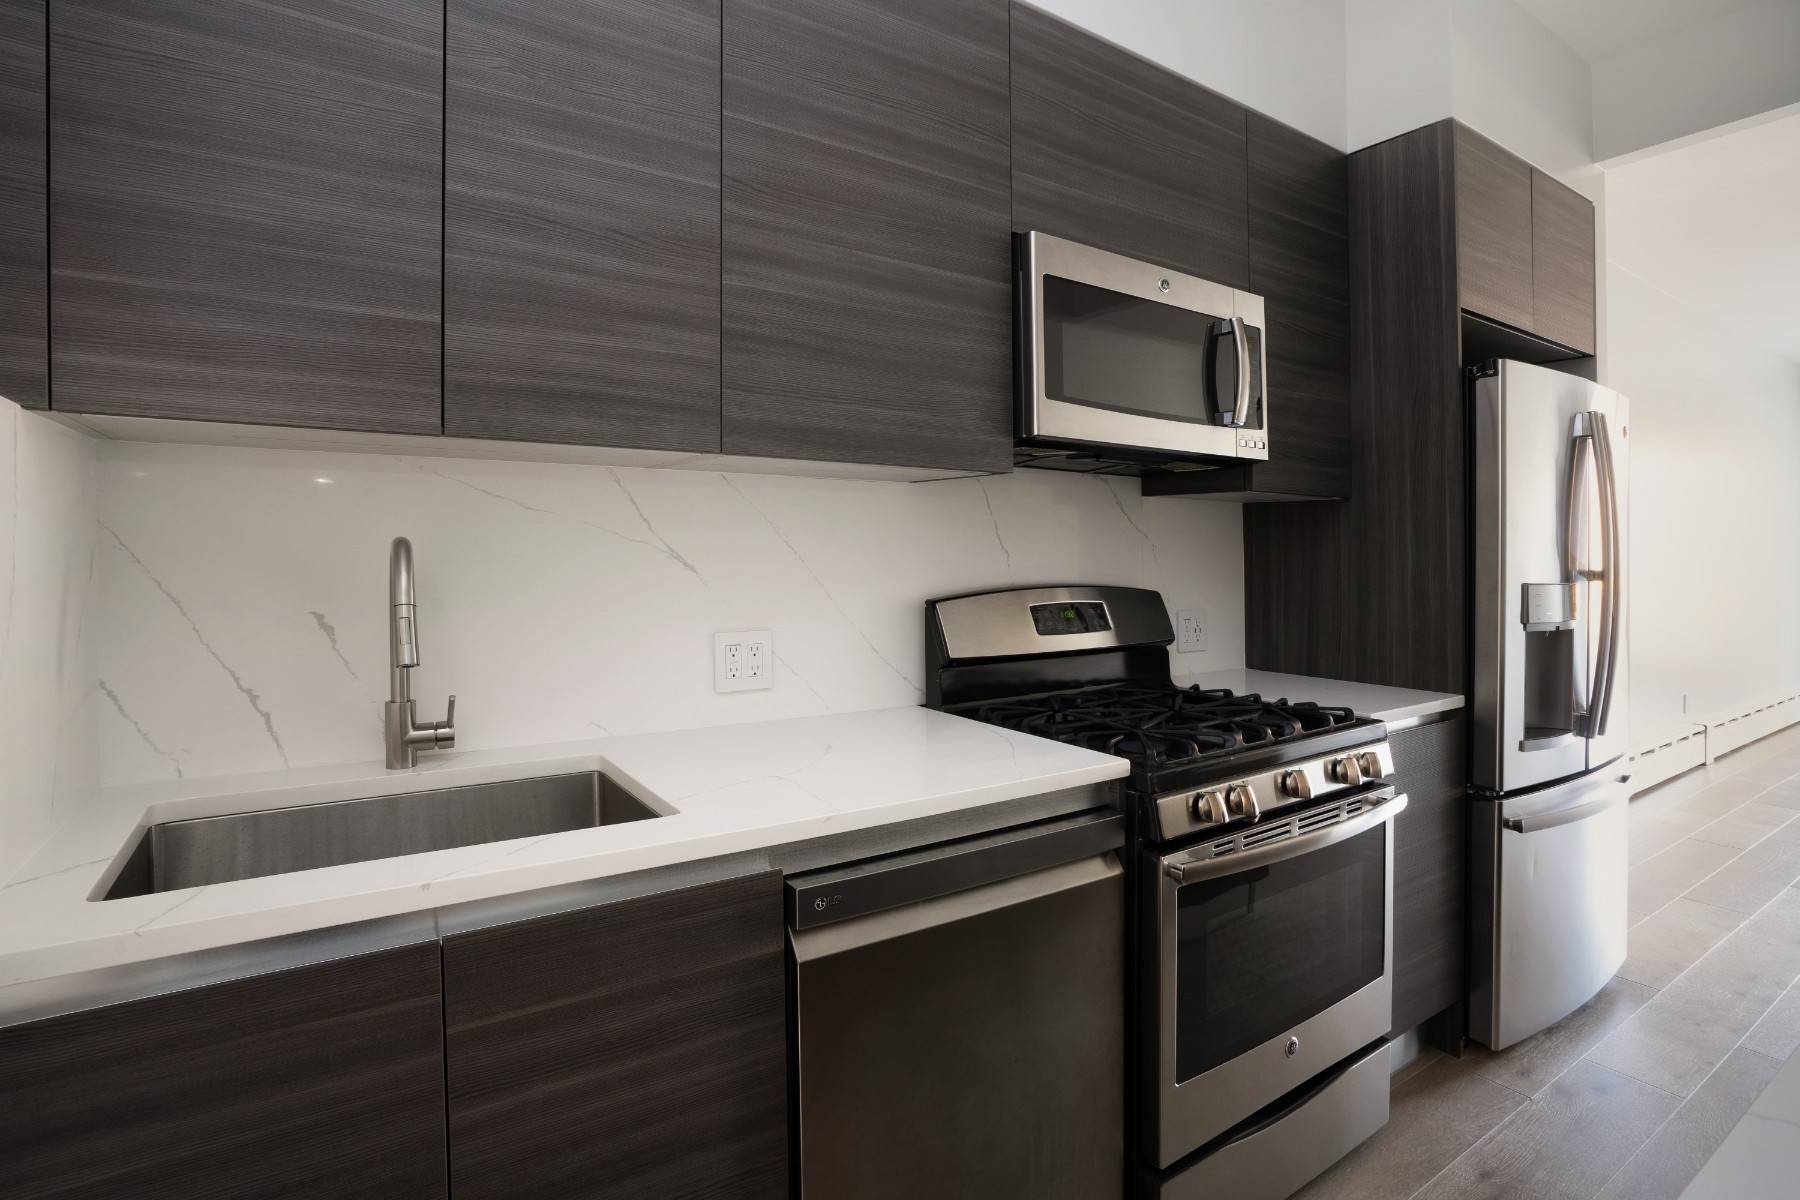 1R is a sensational a1 BED, 1 BATH with 850 sq ft interior and 160 sq ft patio.